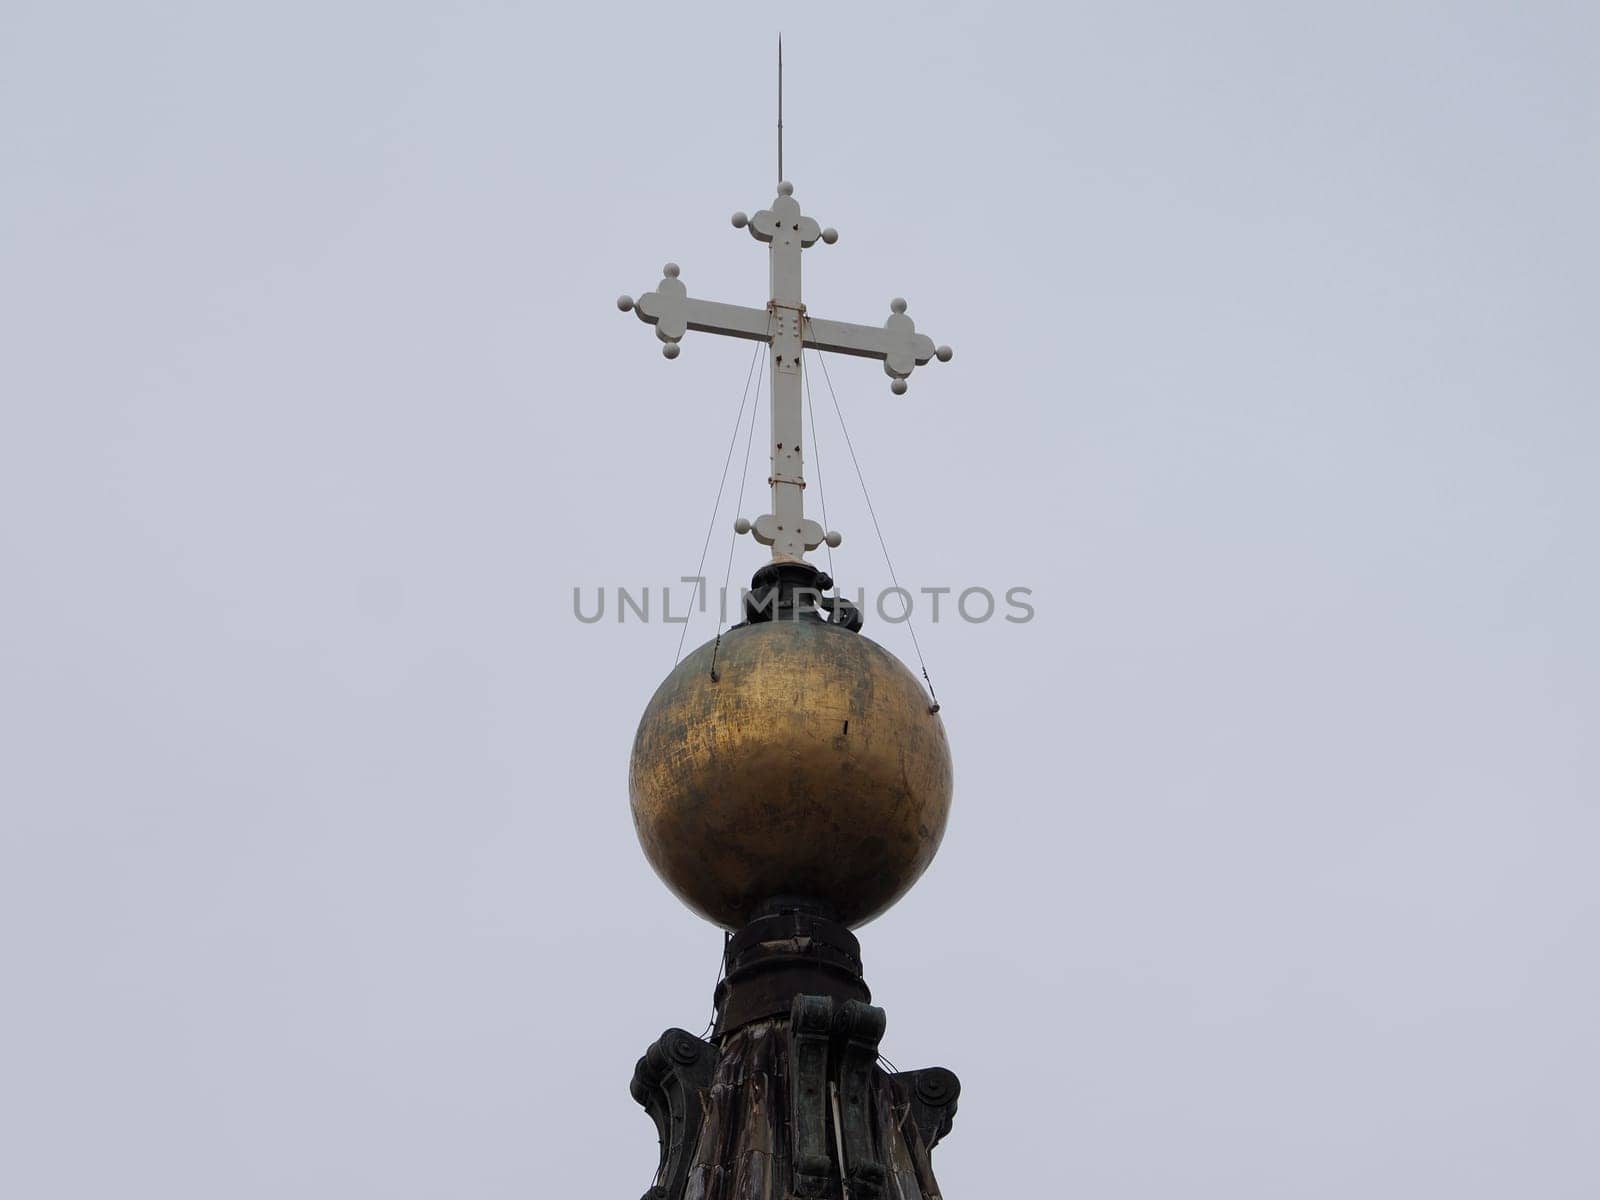 saint peter basilica rome view from rooftop dome detail by AndreaIzzotti